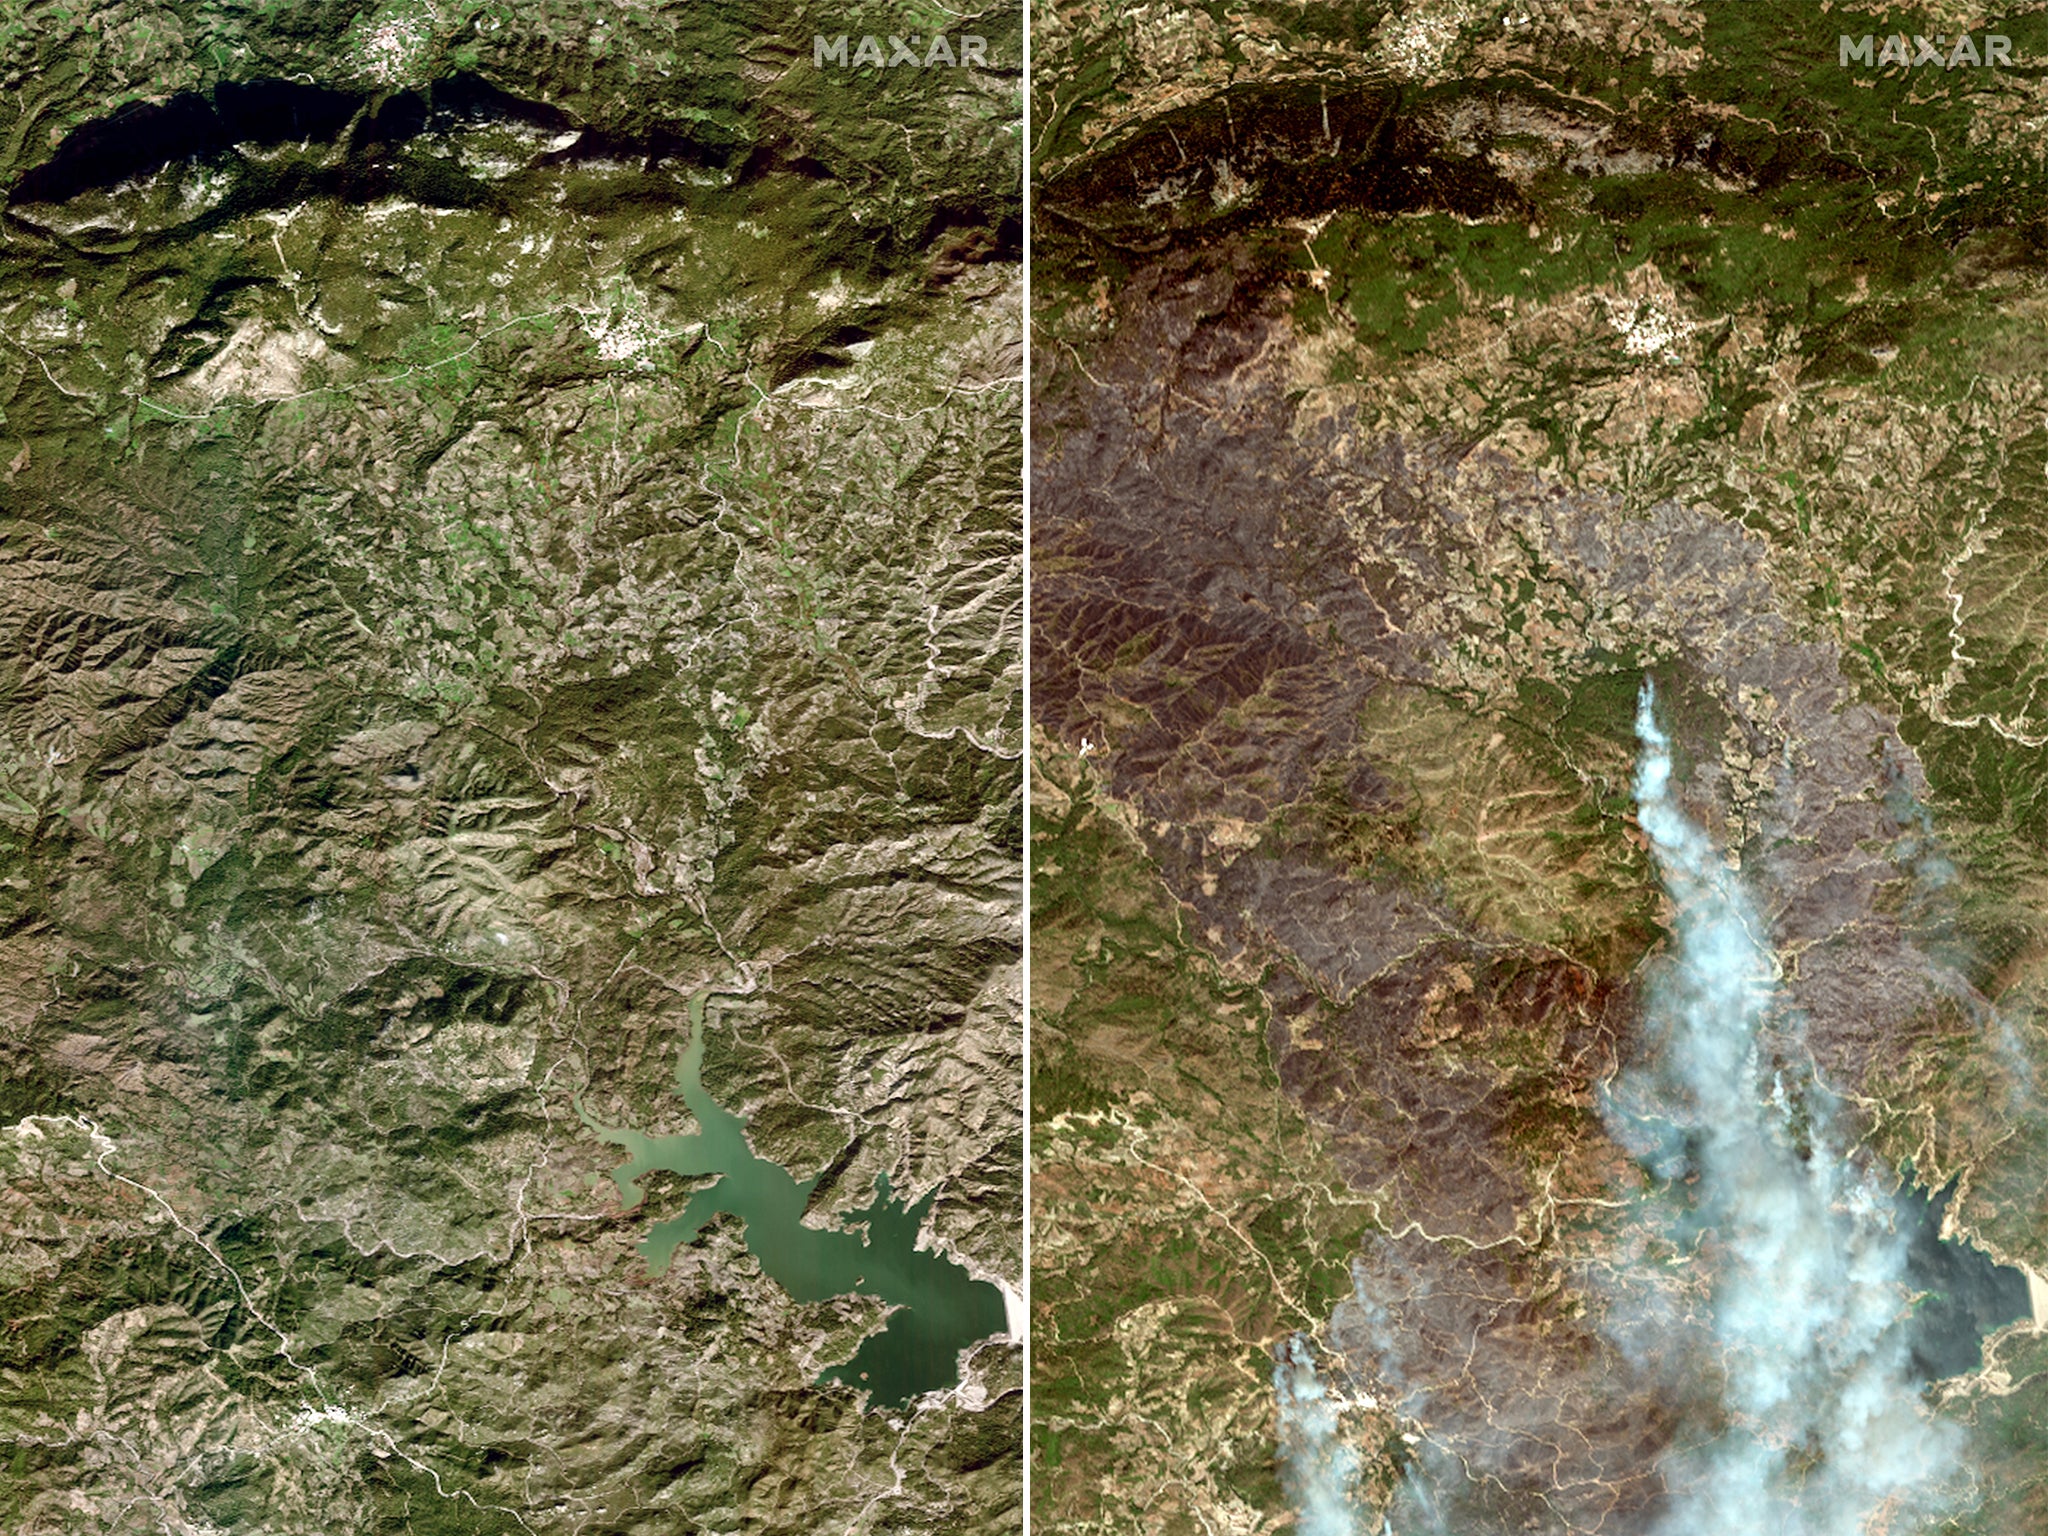 Before and after pictures - the first taken in January and the second on Sunday - show the damage caused by the wildfires